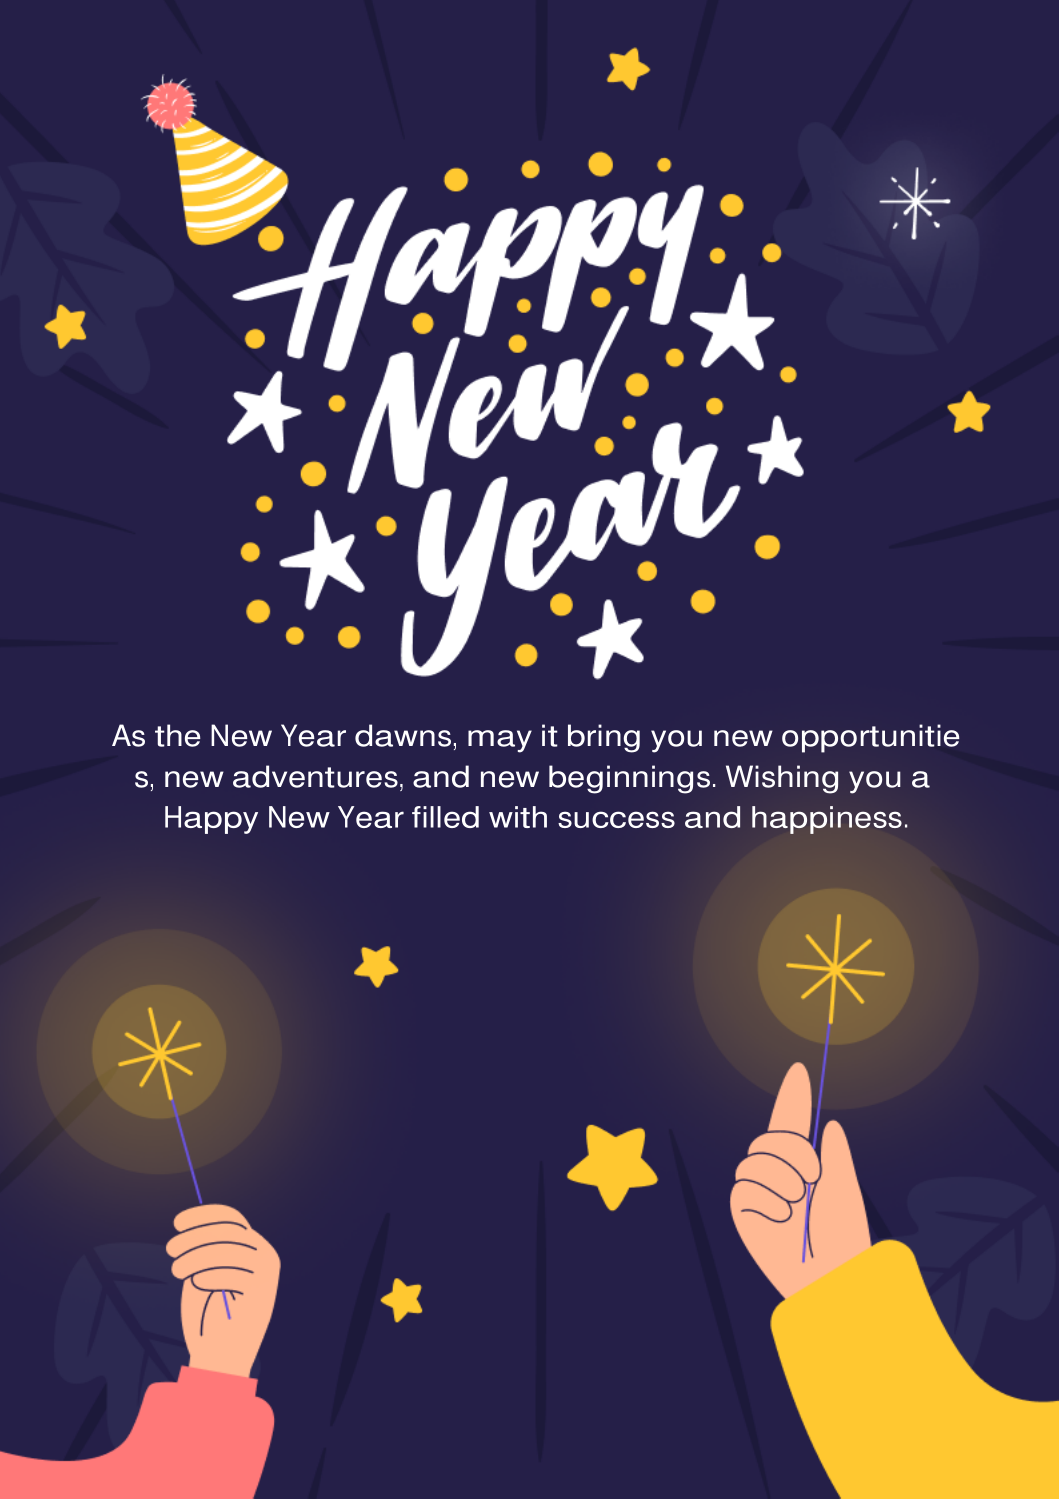 New Year wishes for clients